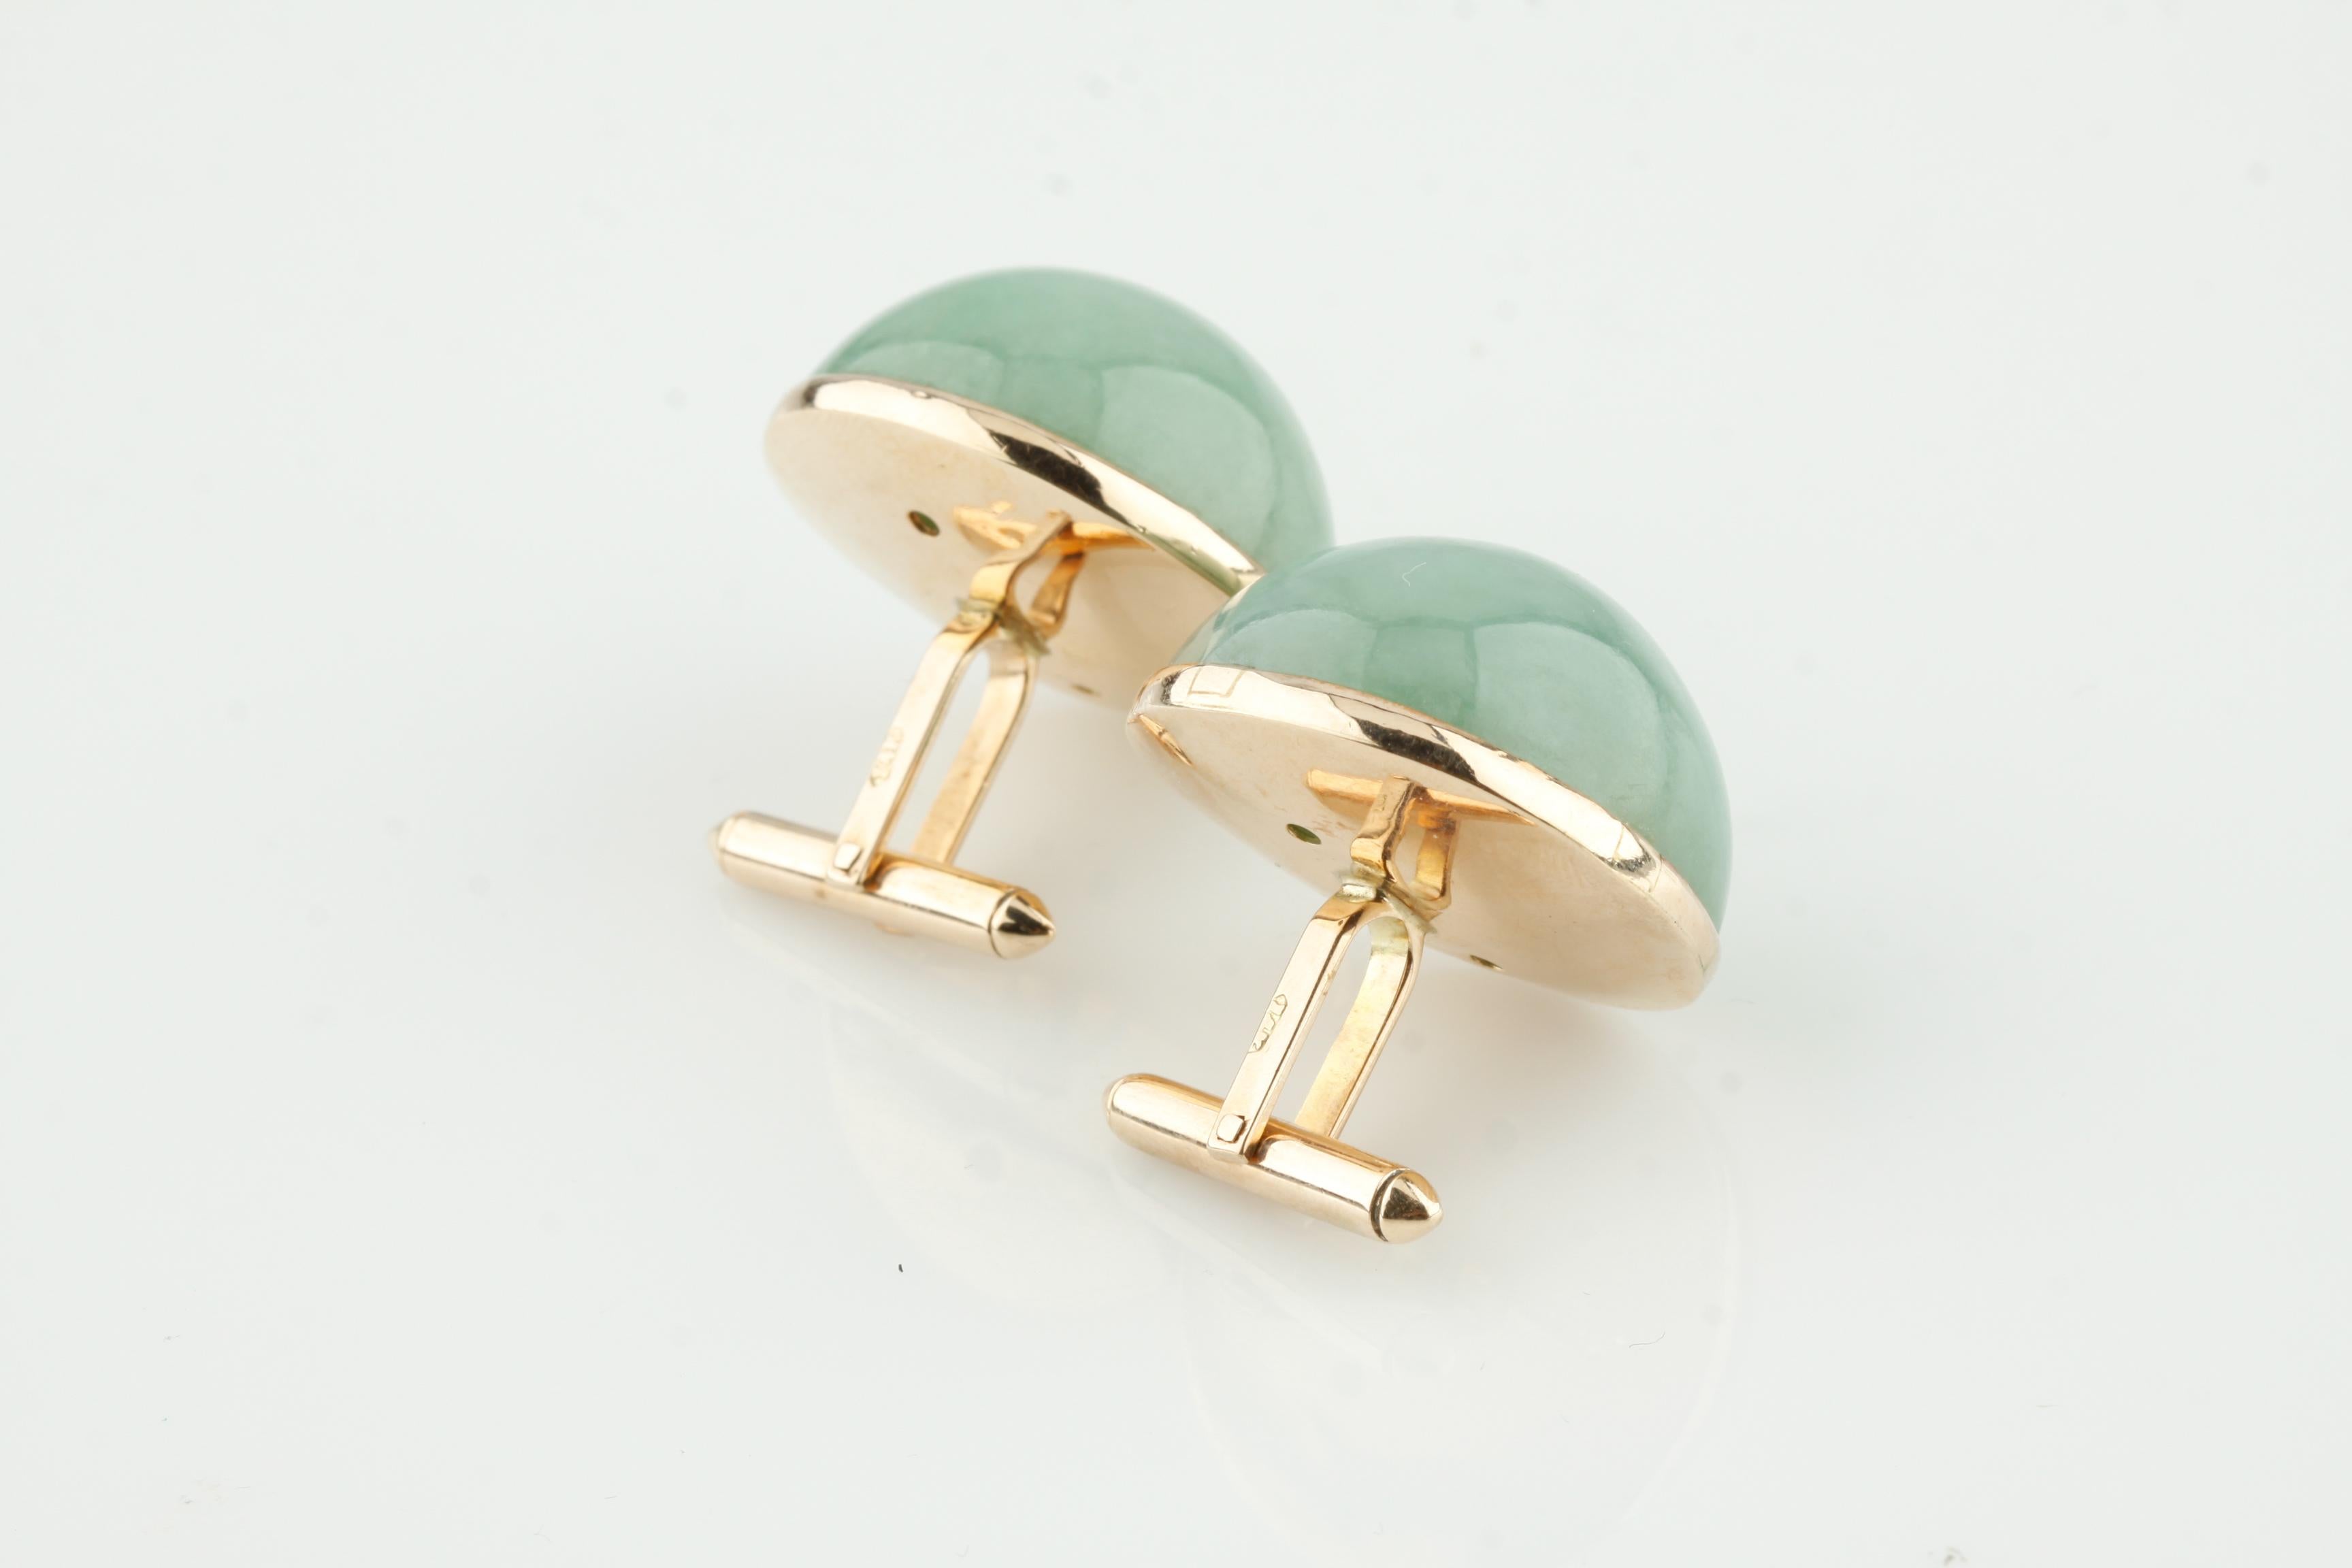 Gorgeous Cufflinks with Jade Cabochons
Diameter of Cufflink = 27 mm
Total Weight of Jade = Over 100 Carats
Total Mass of Cufflinks = 41.4 grams
Beautiful Gift!